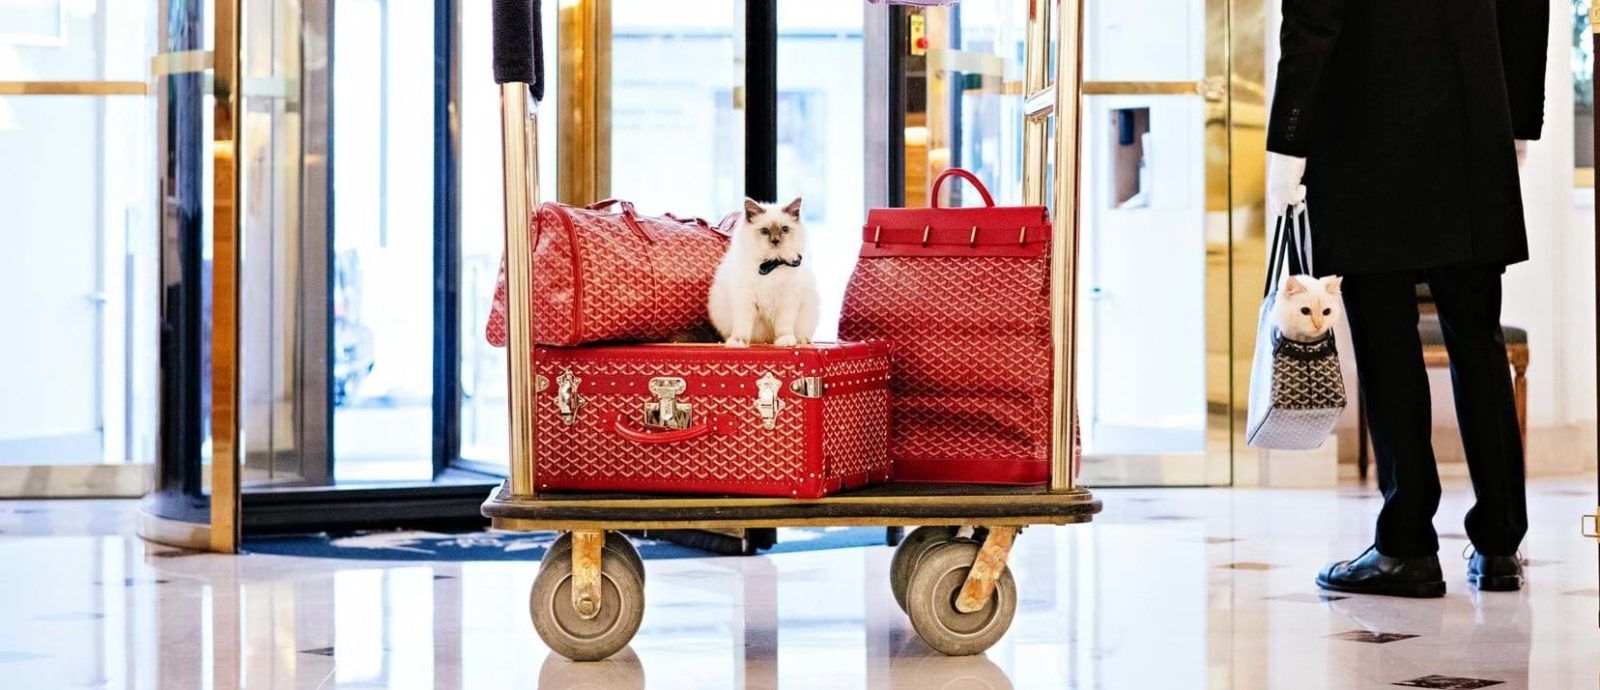 These Hotels Have The Cutest Animals As Brand Ambassadors!